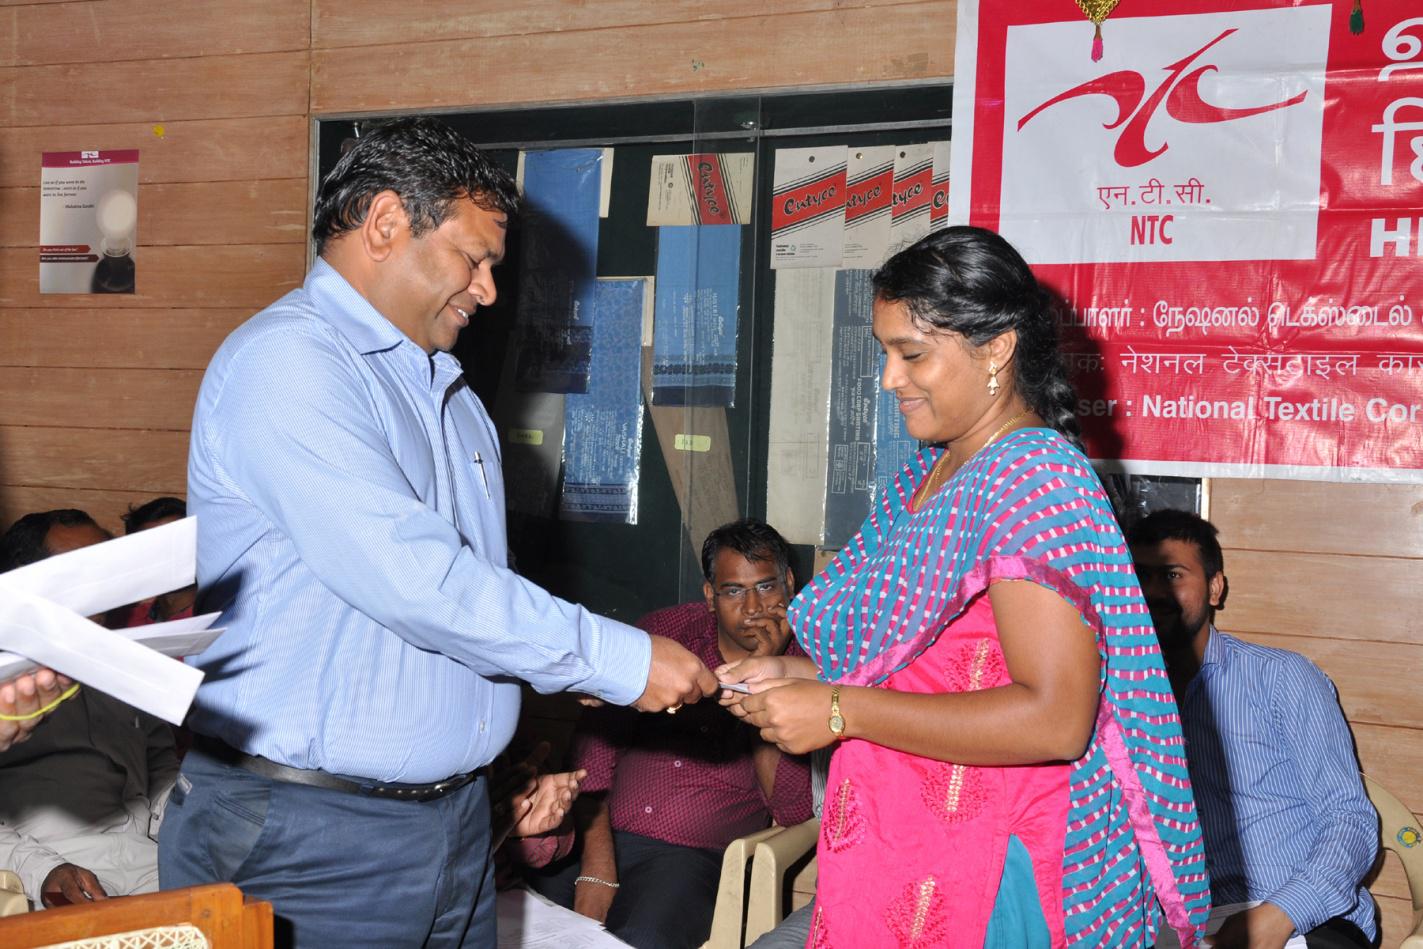 Shri AMS Rajesh Kanna, Dy. General Manager (IT), S R O distributing prize to Smt. D. Kruthika, S R O on the occasion of Hindi Fortnight Prize Distribution Function held on 26.09.2016 at NTC Ltd., Southern Regional Office, Coimbatore 